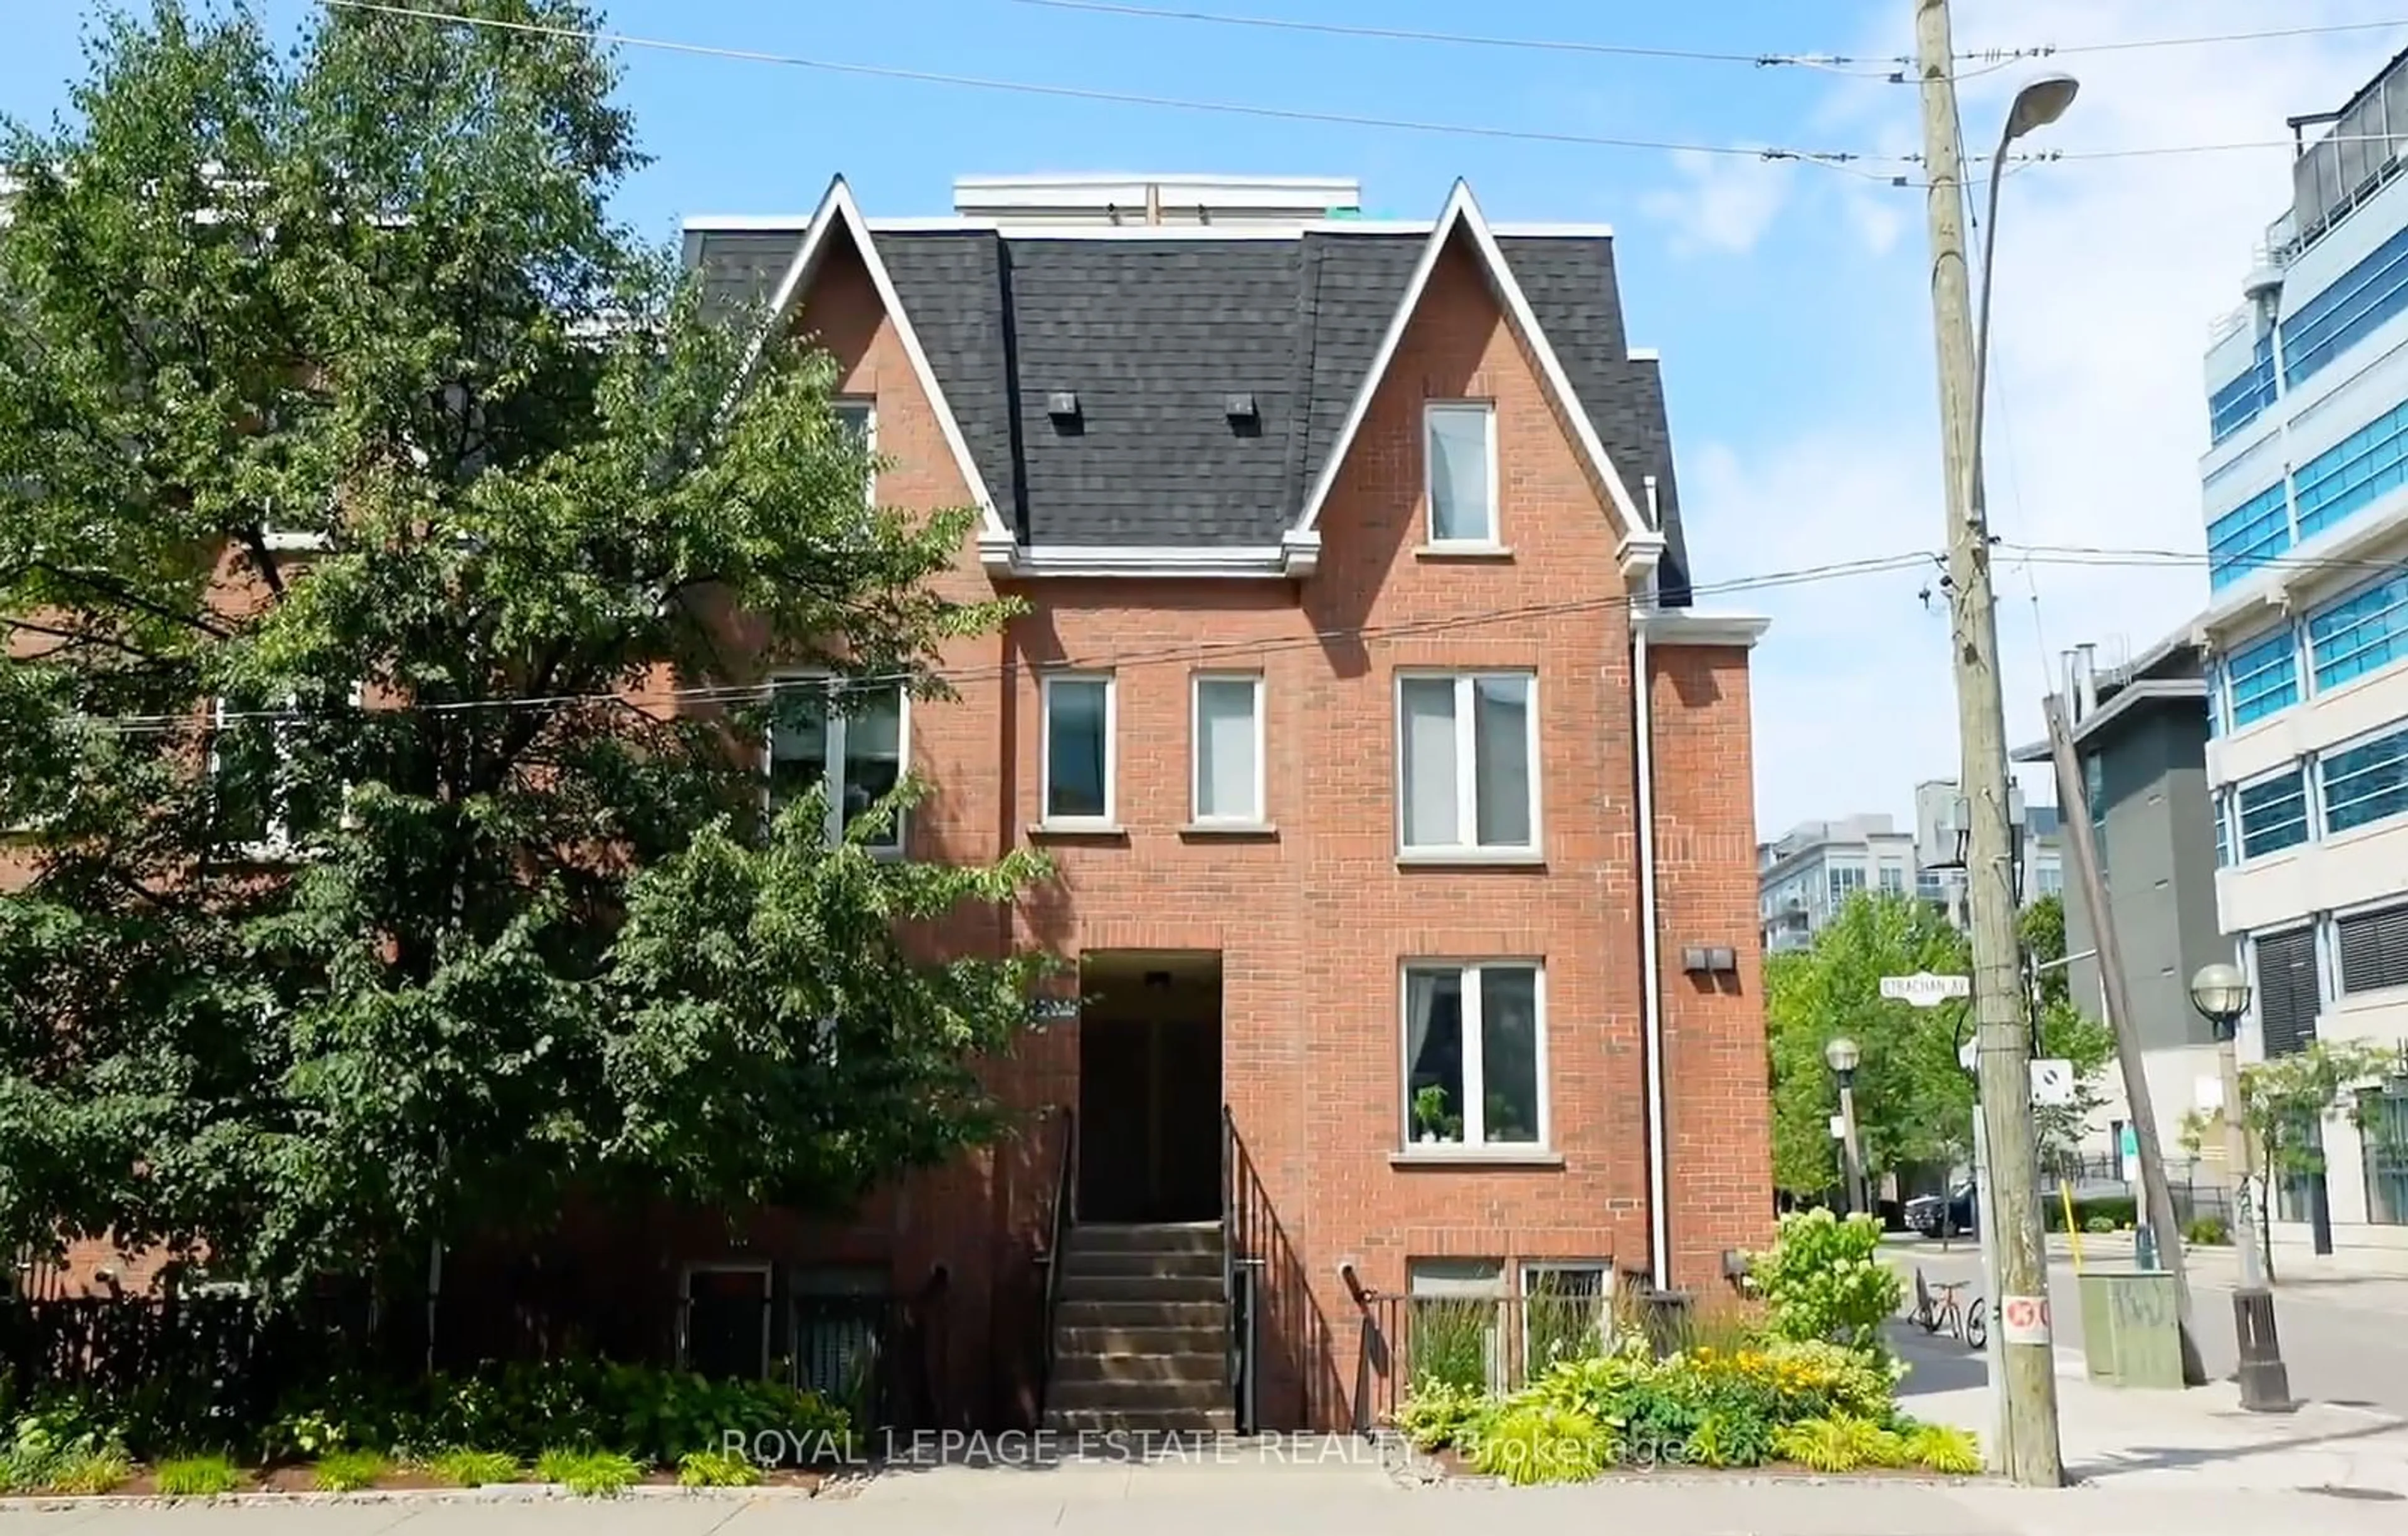 Home with brick exterior material for 100 Strachan Ave #601, Toronto Ontario M6K 3M6